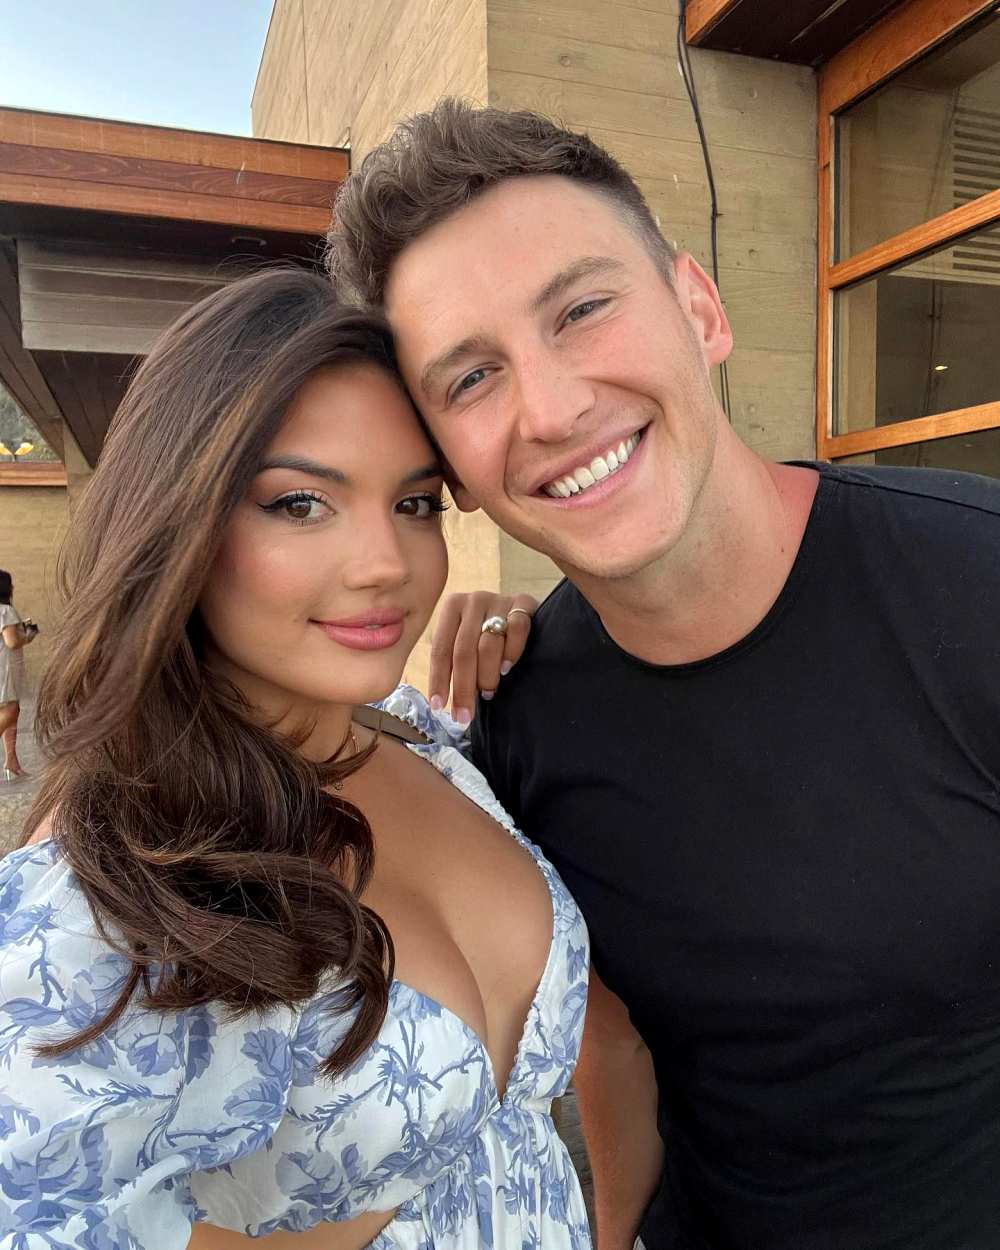 Blake Horstmann Explains How His Relationship With Giannina Gibelli Is 'Different' and 'Magical'